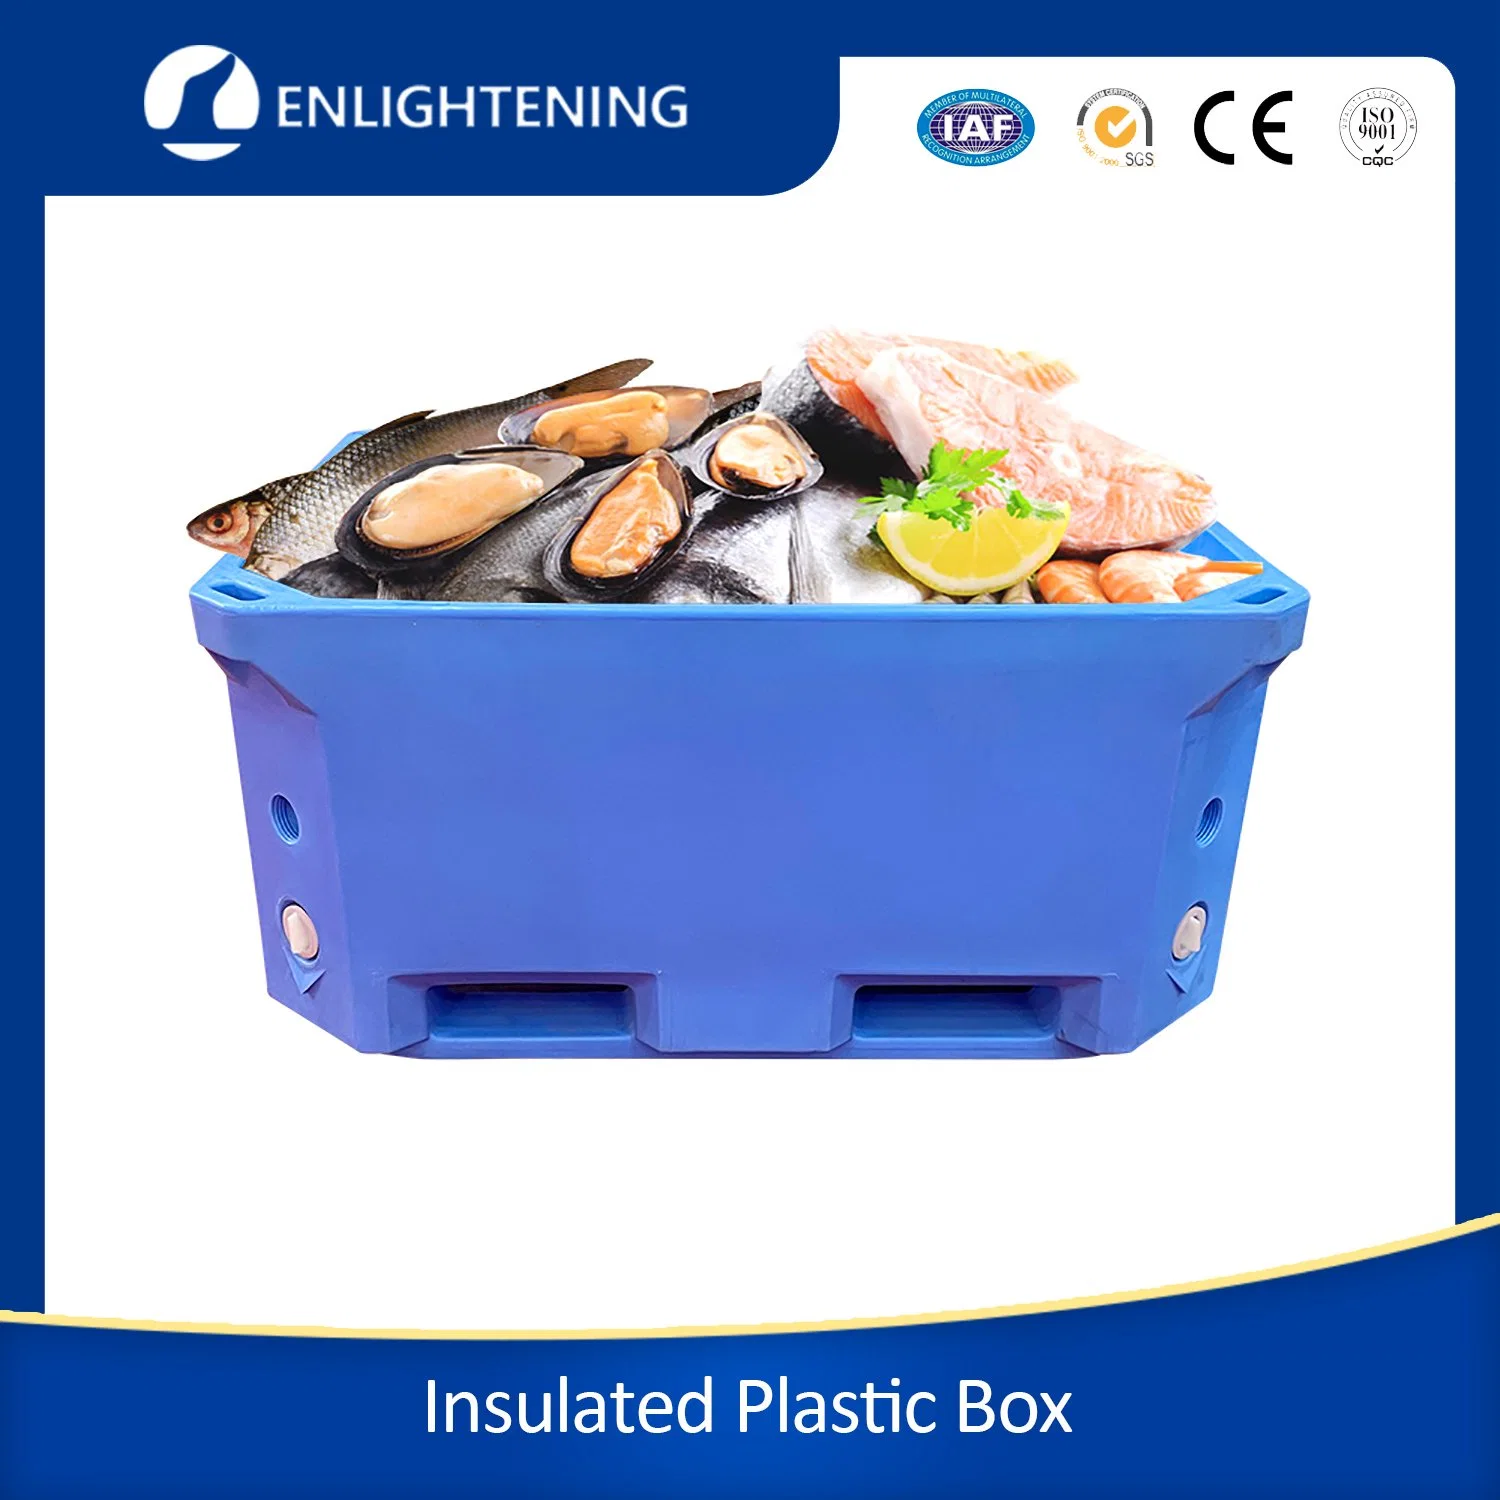 660L Insulated Fish Tubs Seafood Industrial Use Plastic Containers Cooler Box Fish Bins Container